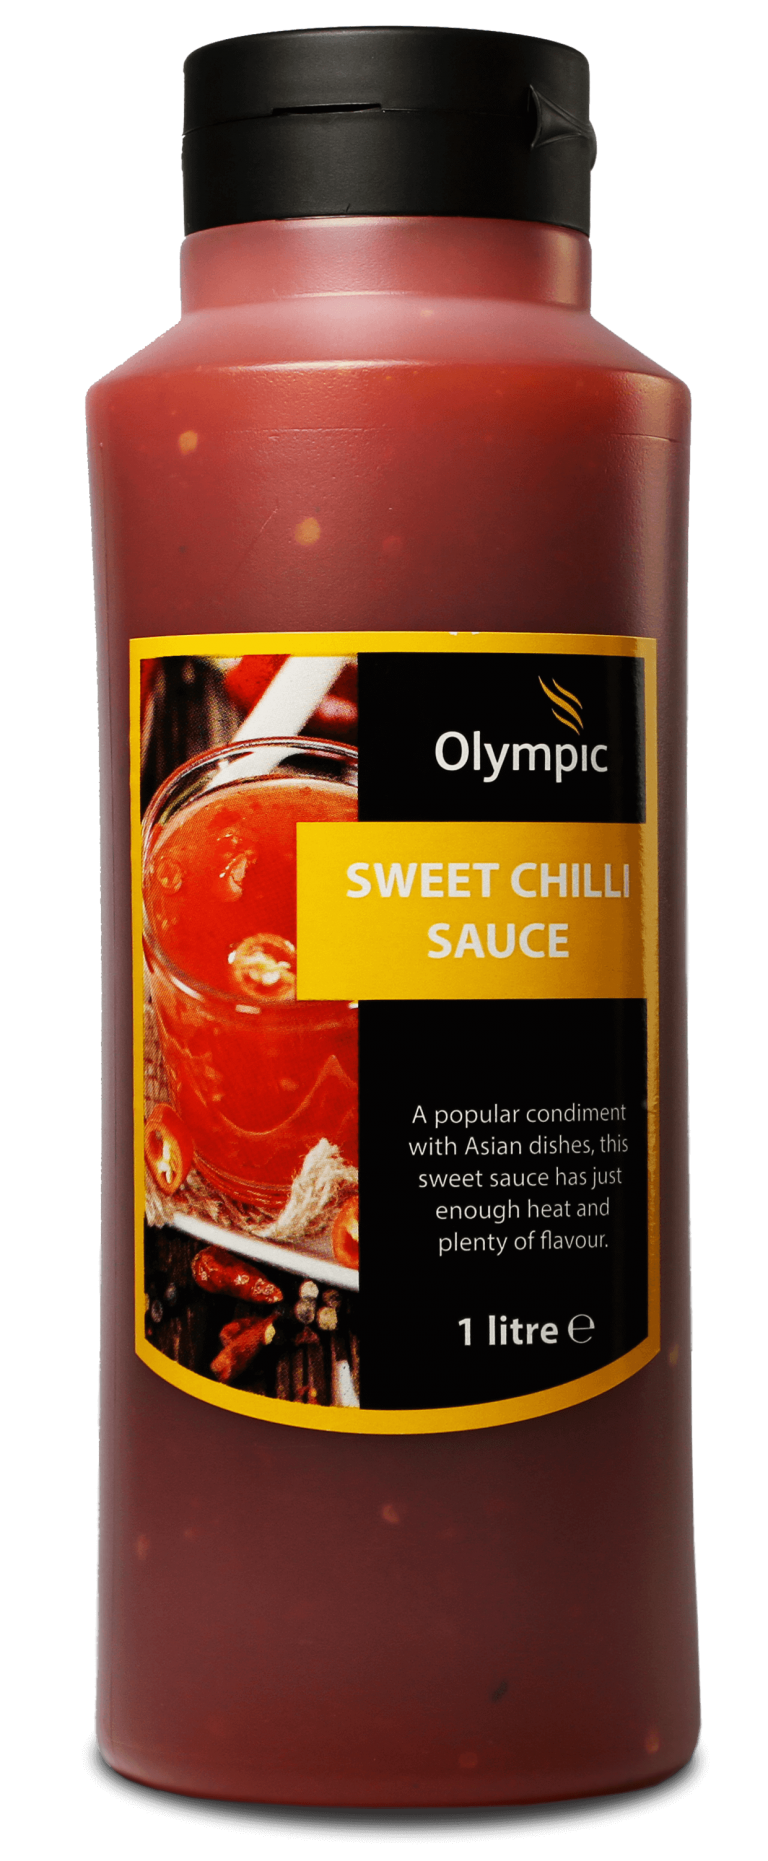 Olympic Sweet Chilli Sauce 6x1 Litre Bottle   Olympic Foods